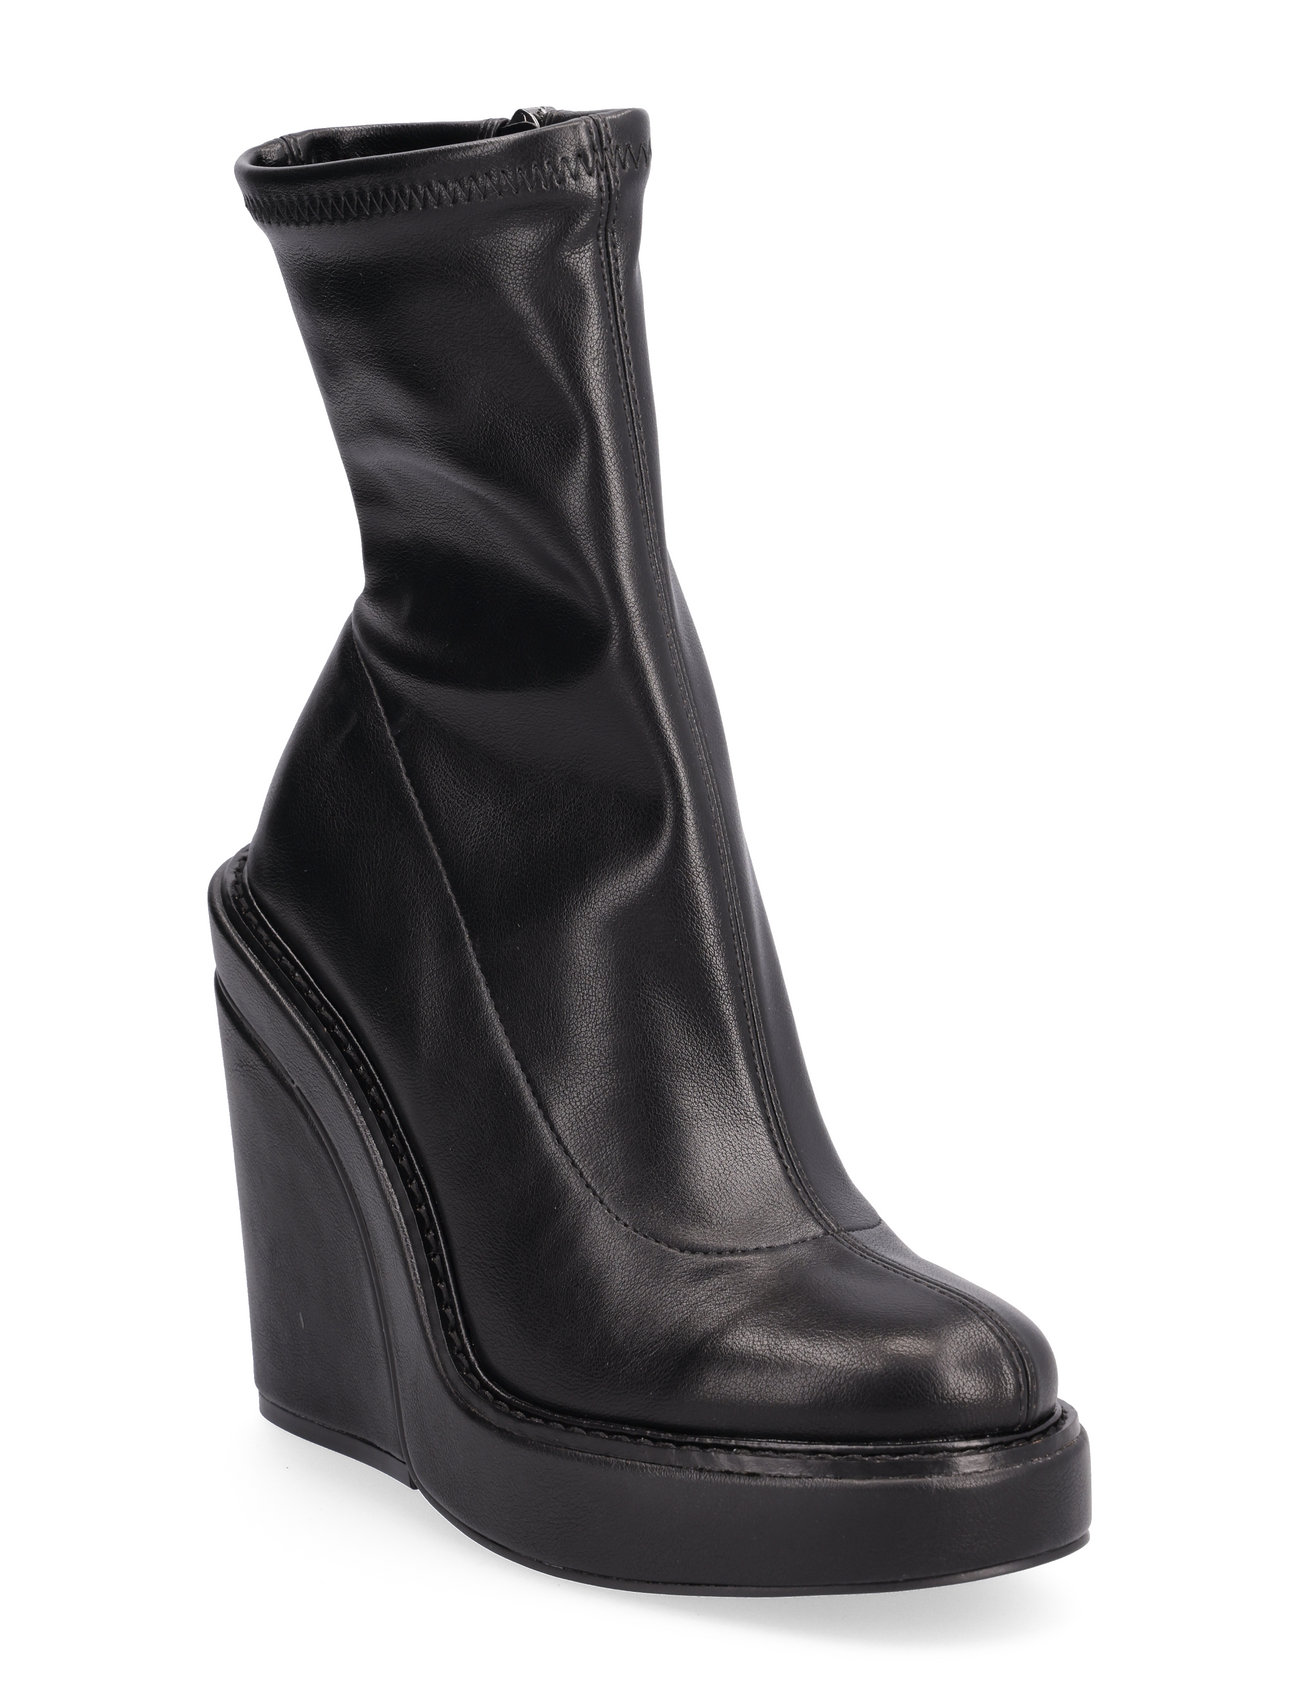 All Out Bootie Shoes Boots Ankle Boots Ankle Boots With Heel Black Steve Madden